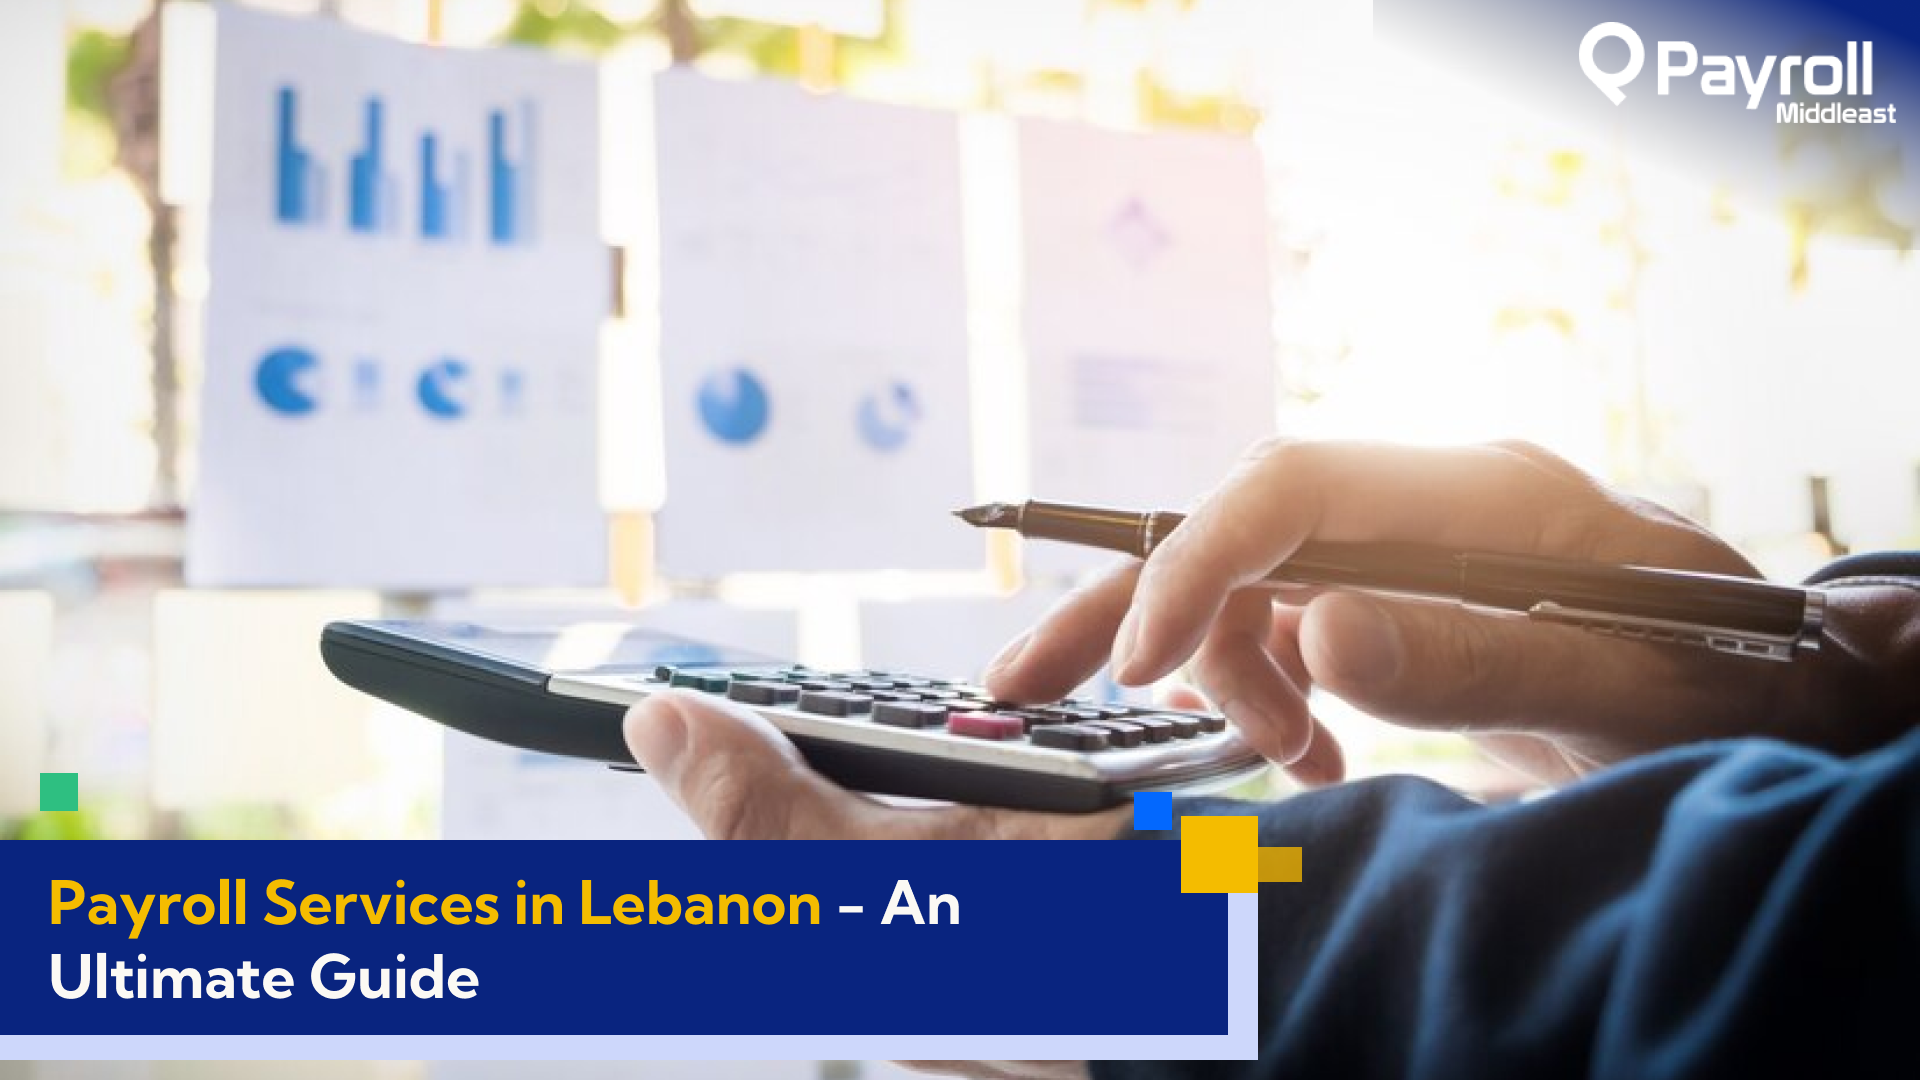 Payroll Services in Lebanon